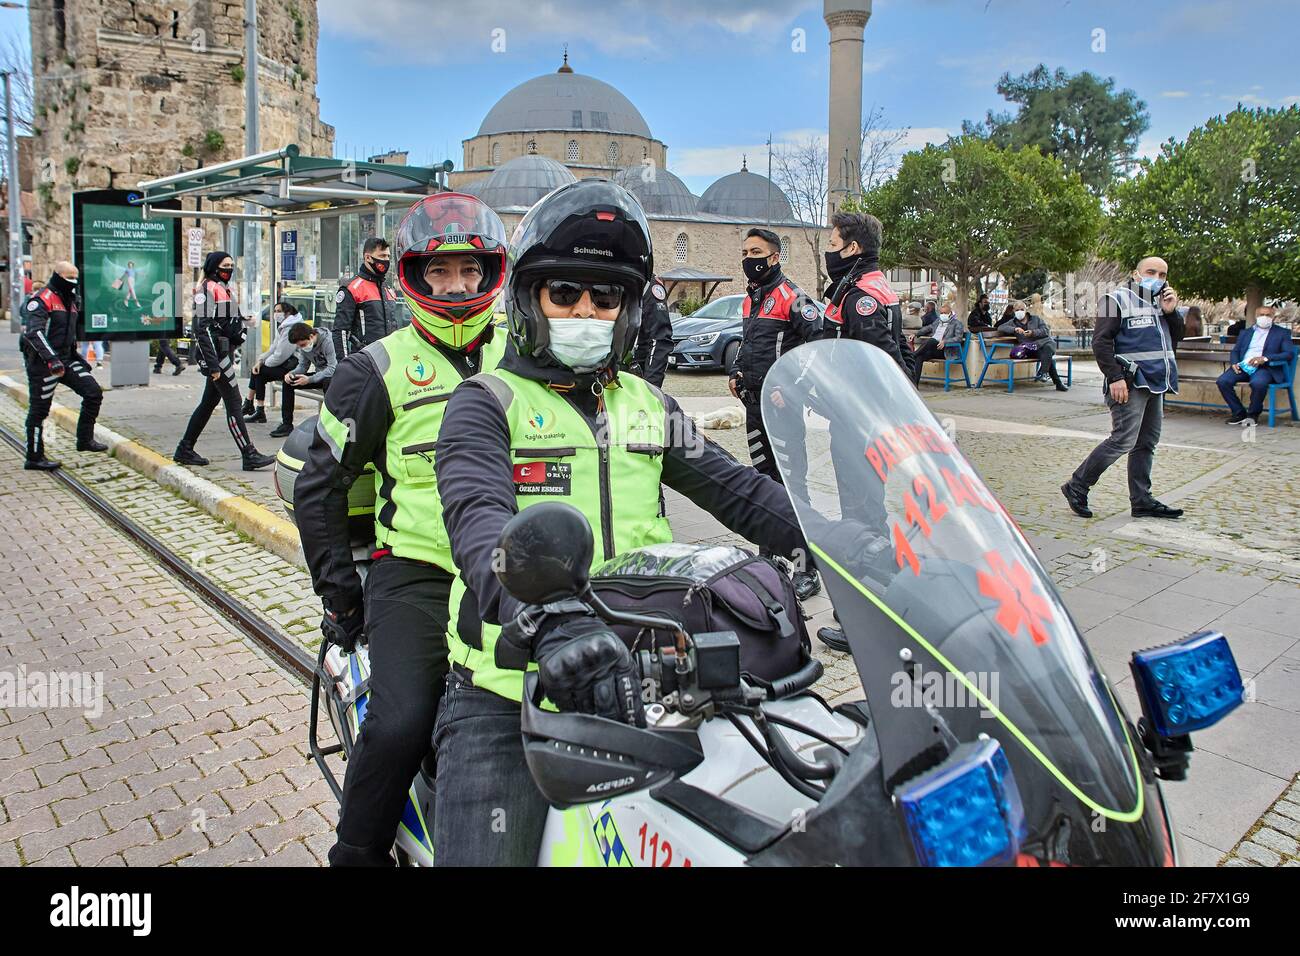 Turkish police officers wearing face masks to protect against coronavirus  prepare to ensure safety of citizens at rally in Antalya, Turkey Stock  Photo - Alamy